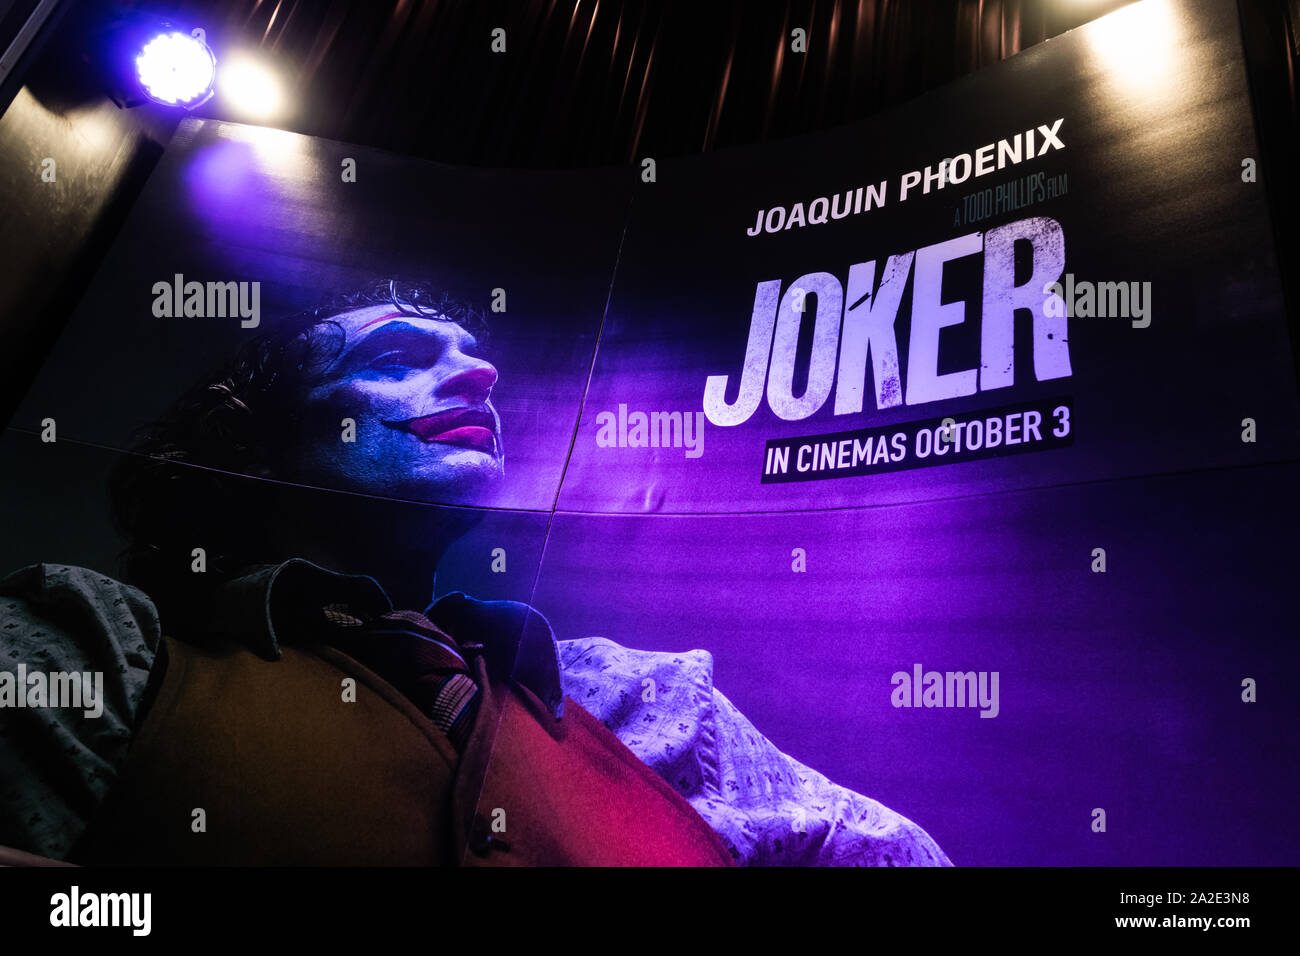 Bangkok, Thailand - Oct 1, 2019: Joker movie backdrop poster with spotlights showing in movie theatre. Cinema promotional advertisement concept Stock Photo